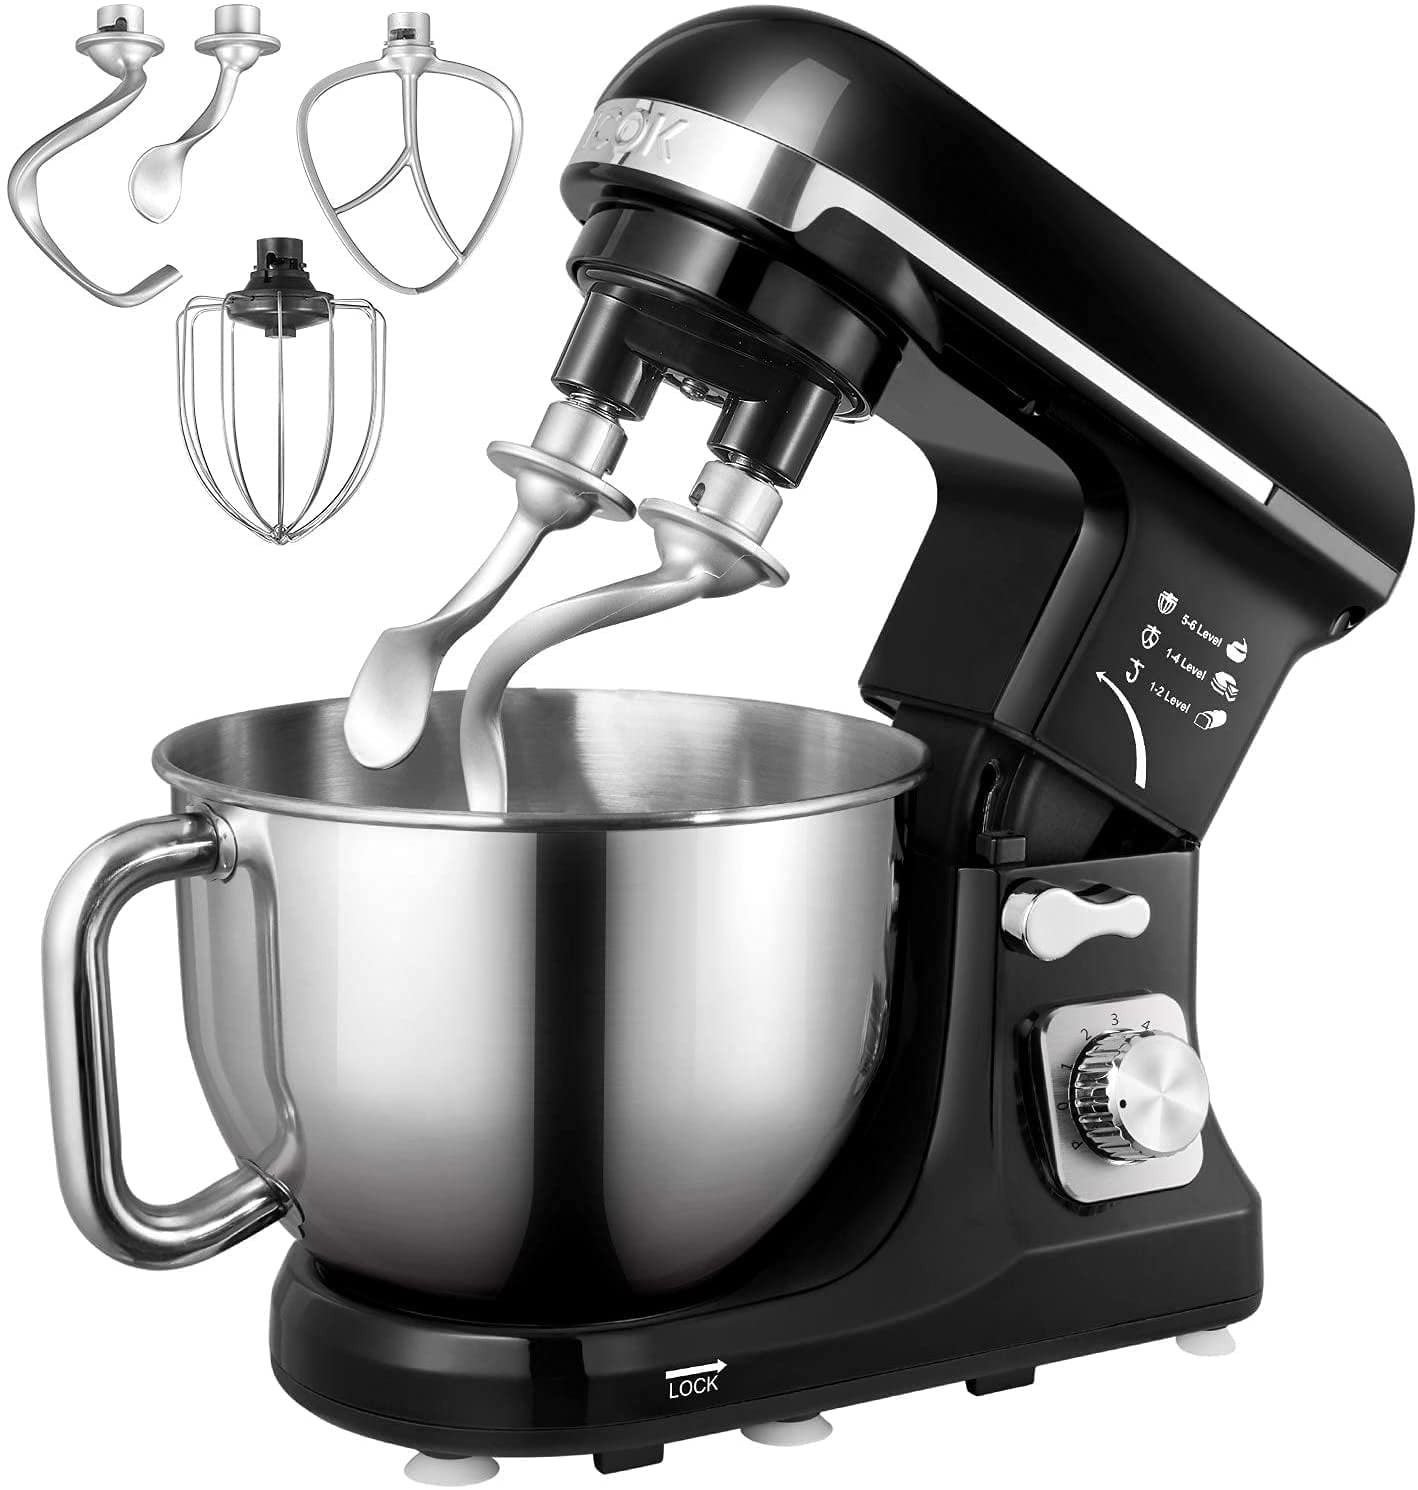 Dough Mixer with Ferment Function Mixing 550W Dough Machine with 5L Stainless Steel Bowl for Baking Black KICHOT Intelligent Timing & LCD Display Stand Mixer Cookie Cake